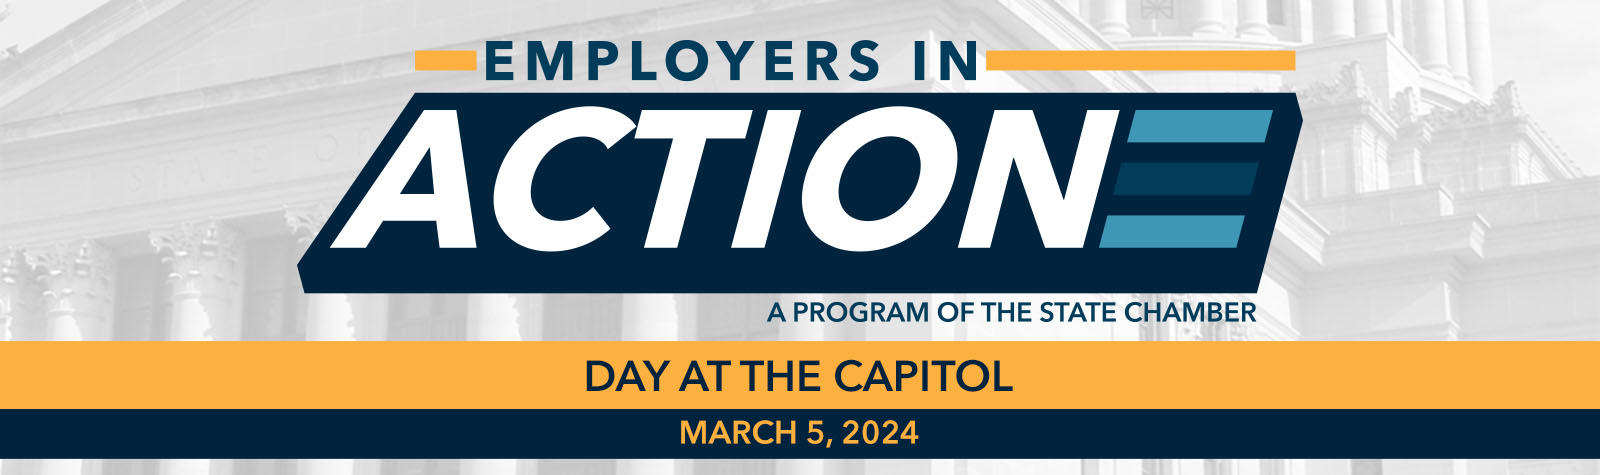 Employers in Action Day at the Capitol | March 5, 2024